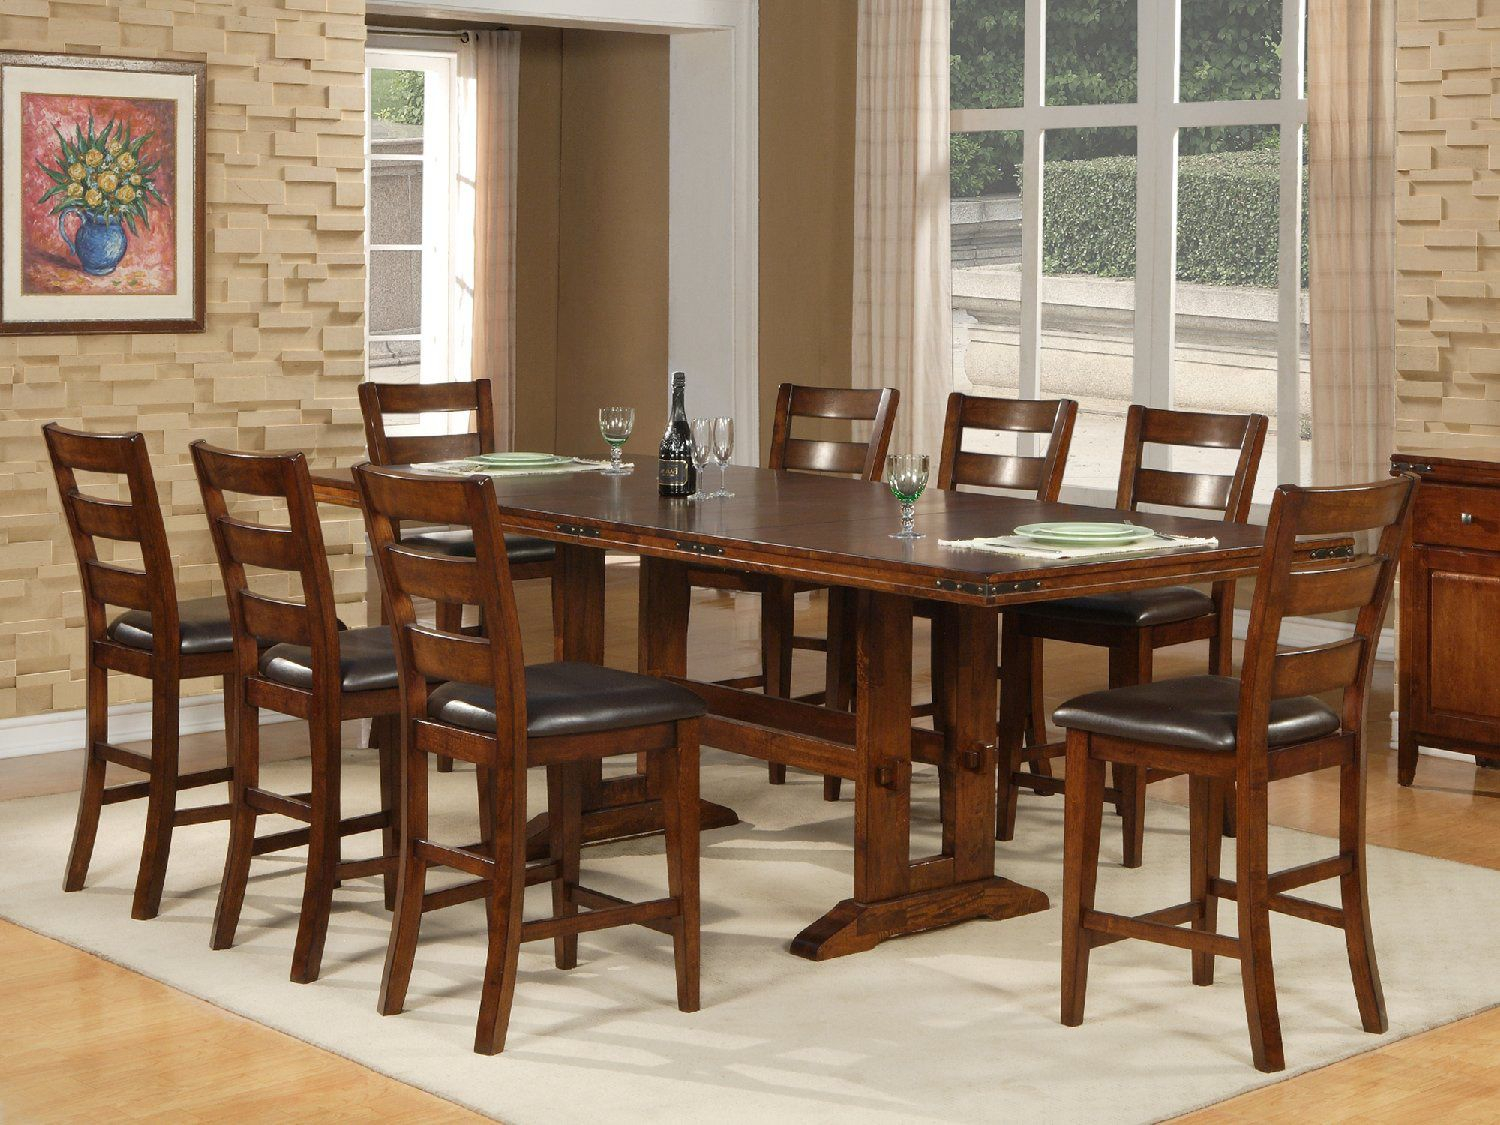 Deluca Gathering Table And 4 Counter Stools Furniture within size 1500 X 1125